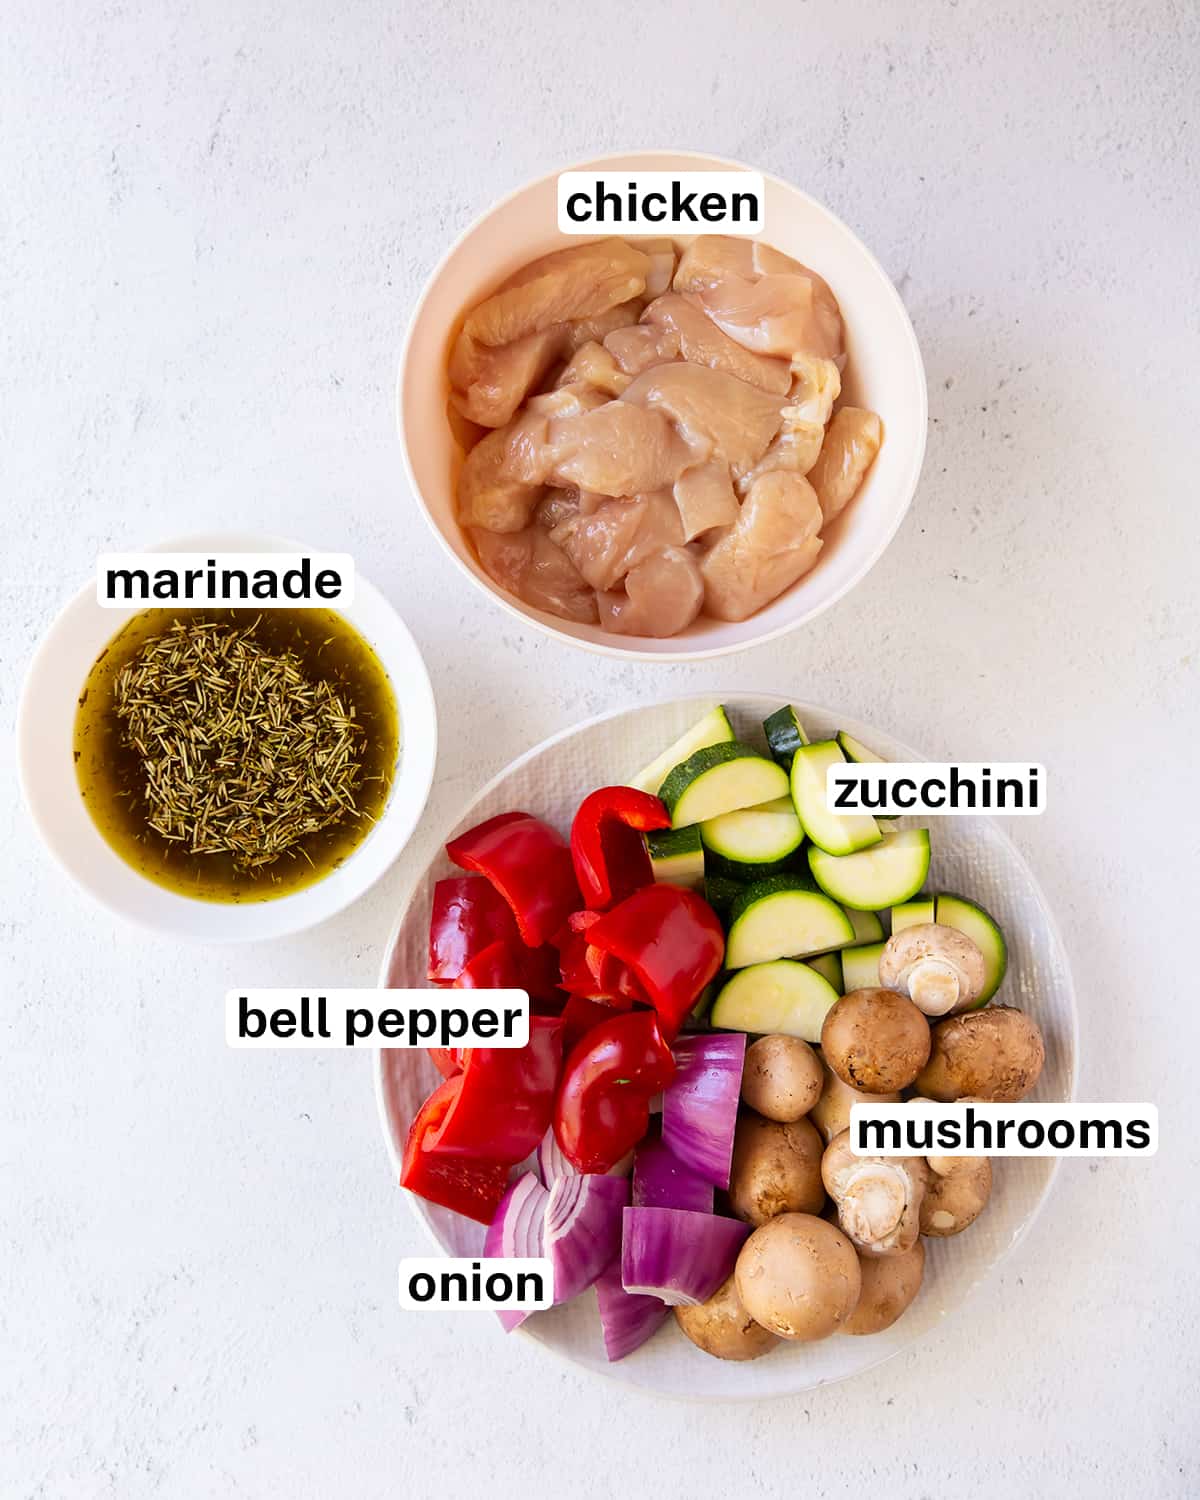 Ingredients including chicken and vegetables with text overlay.